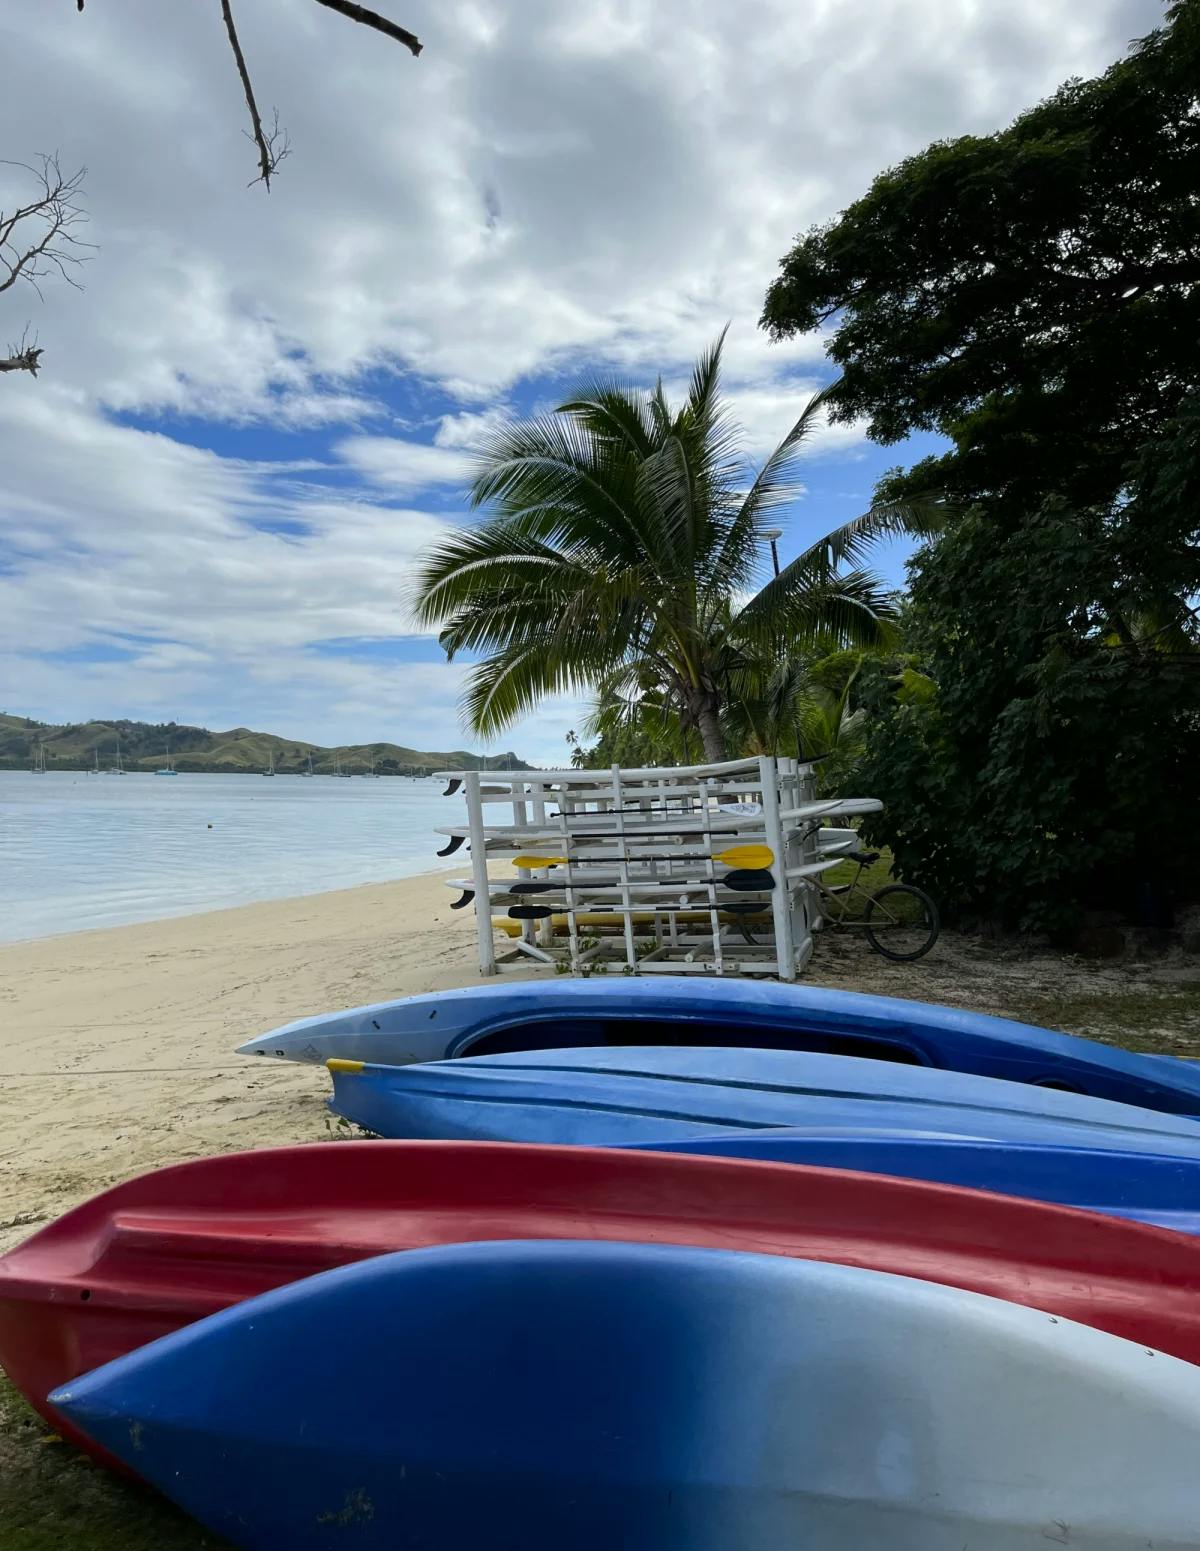 Red and blue kayaks on a beach with trees in the background